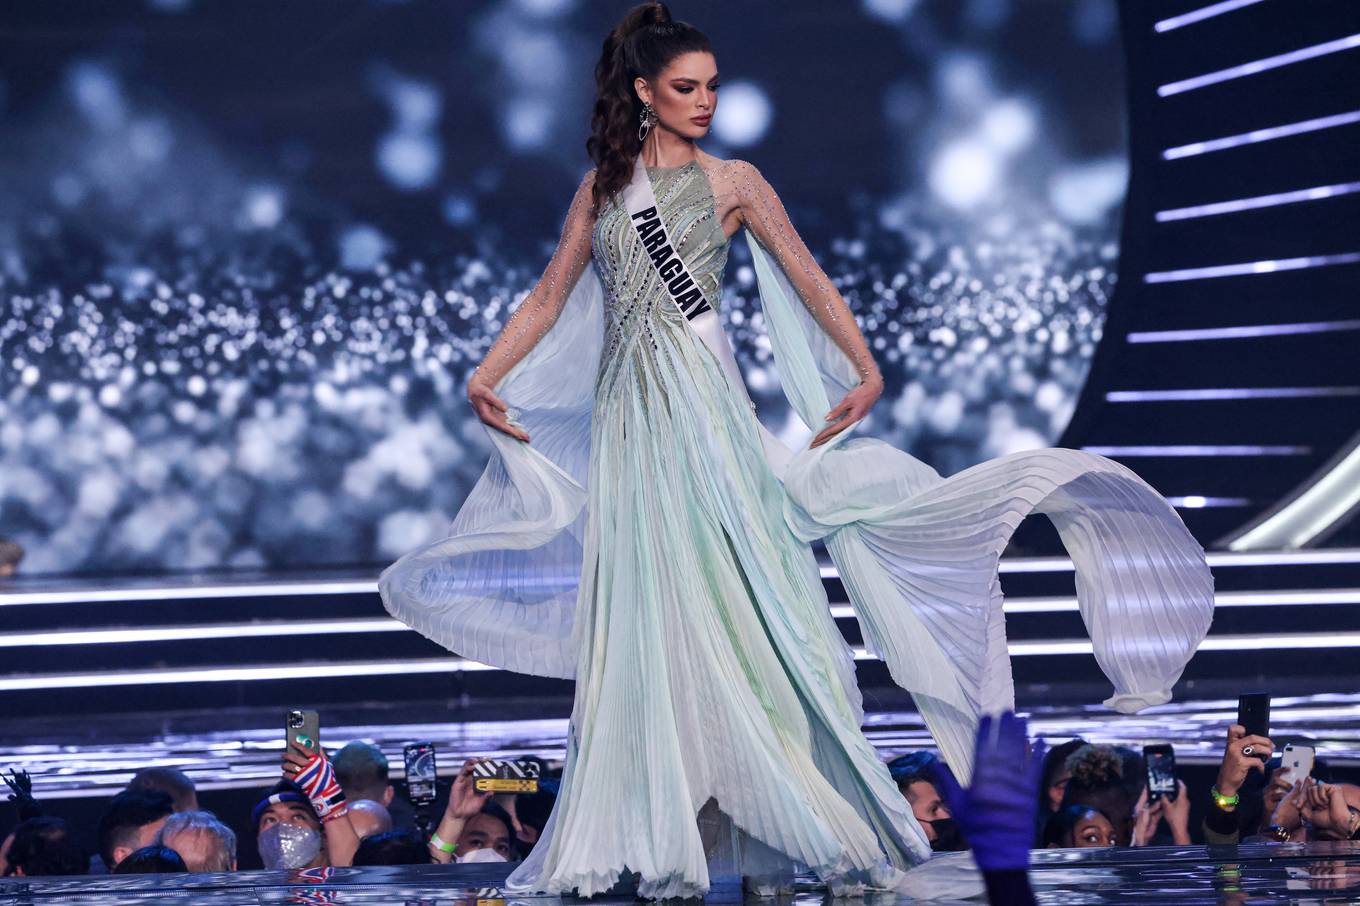 Miss Paraguay, Nadia Ferreira, presents herself on stage during the preliminary stage of the 70th Miss Universe beauty pageant in Israel's southern Red Sea coastal city of Eilat on December 10, 2021. (Photo by Menahem KAHANA / AFP)